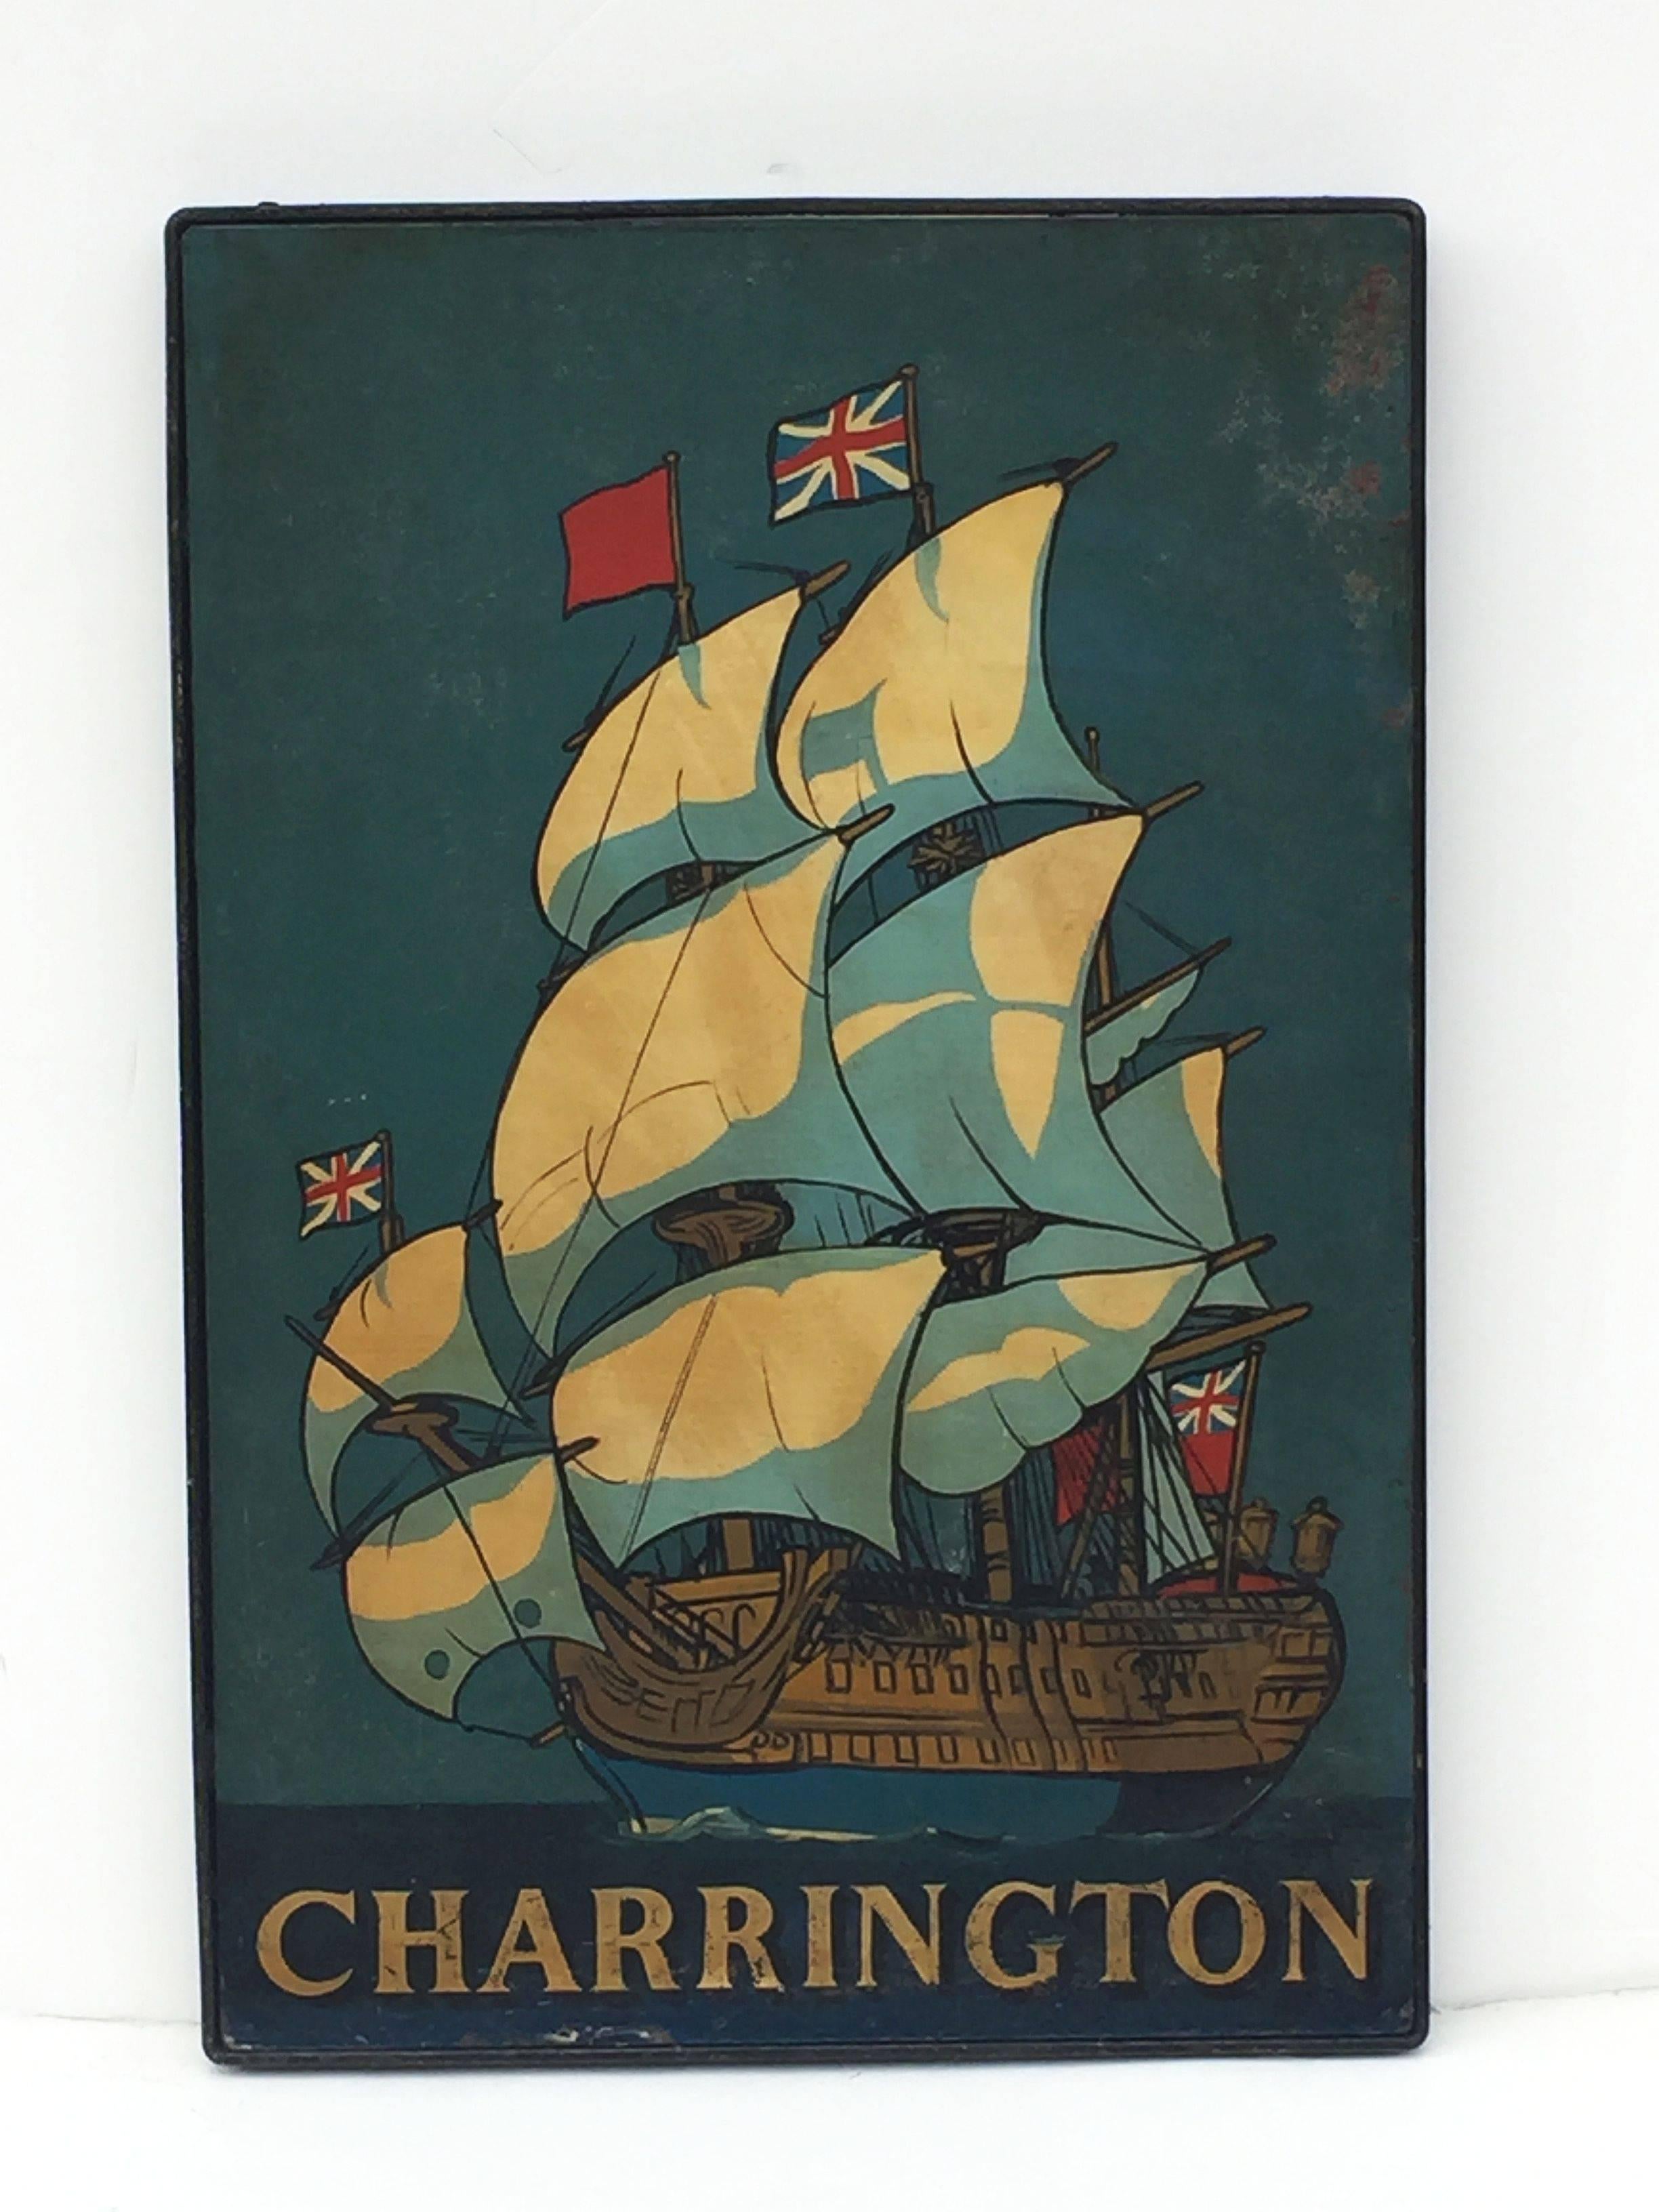 An authentic English pub sign (one-sided) featuring a painting of a sailing ship with numerous flags, including Union Jack and British naval ensign, in iron frame, entitled: Charrington.

Marked: Charrington was a brewery company founded in